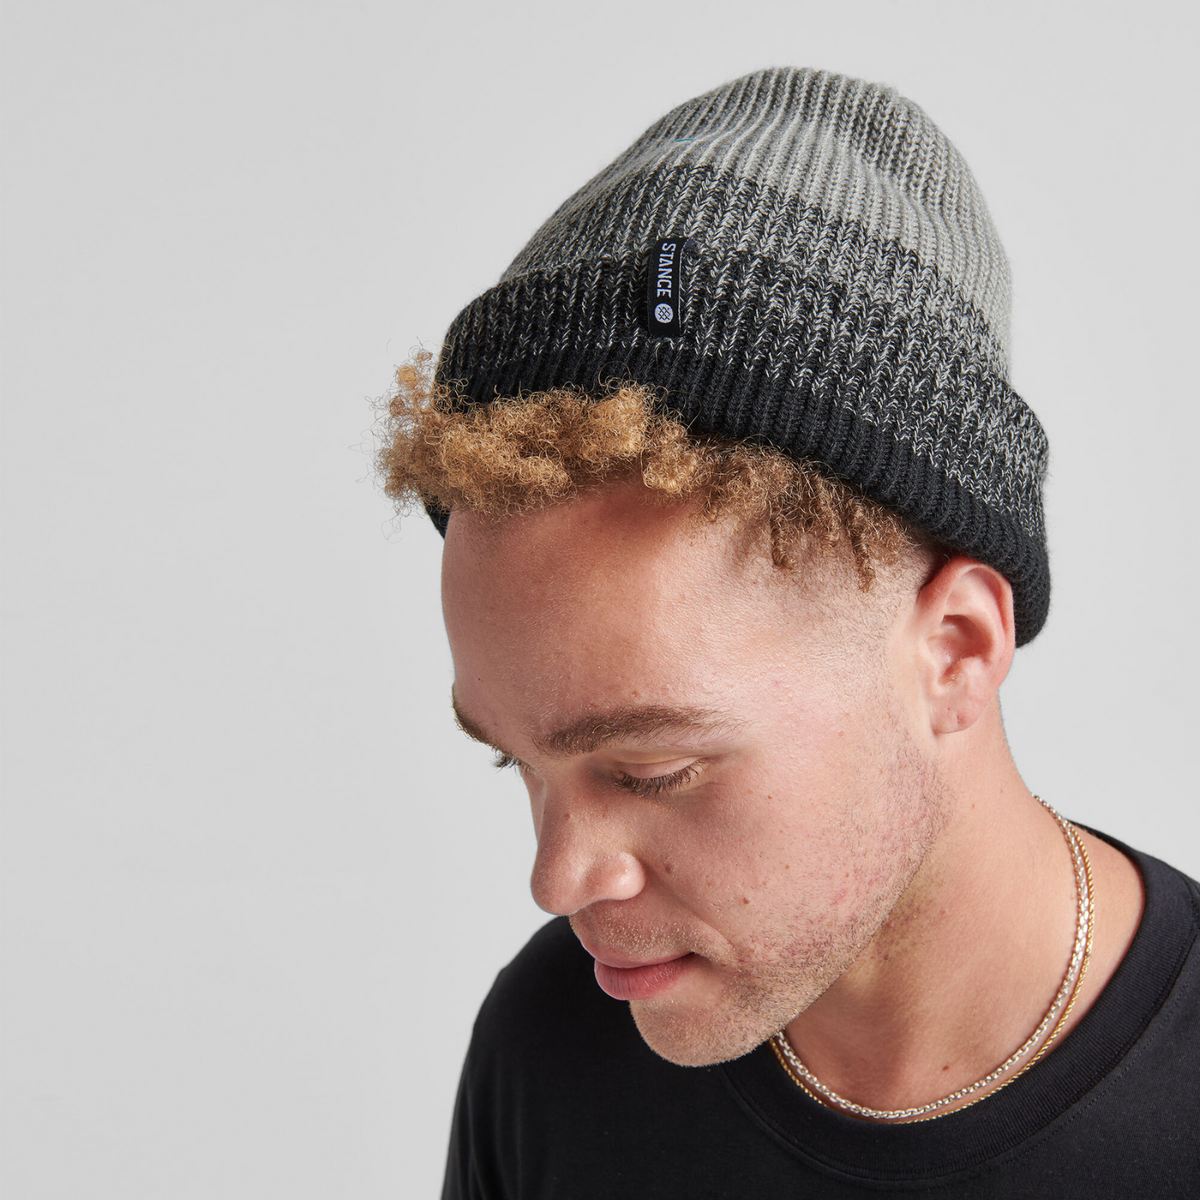 Stance Fade Beanie featuring gray and black pattern on model